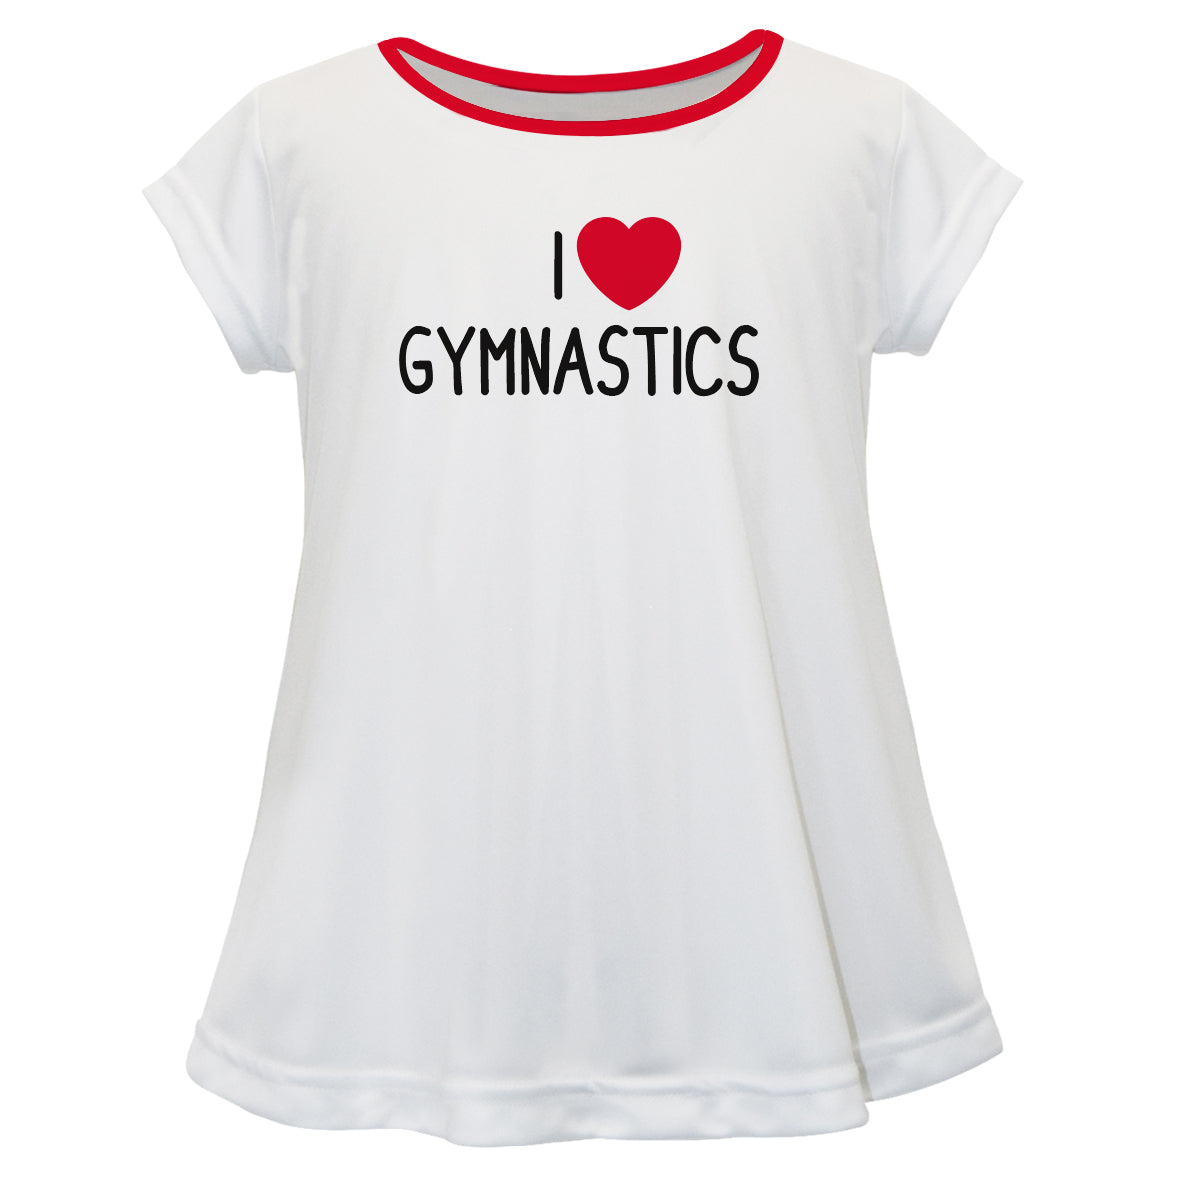 Gymnastics Love White and Red Short Sleeve Laurie Top - Wimziy&Co.